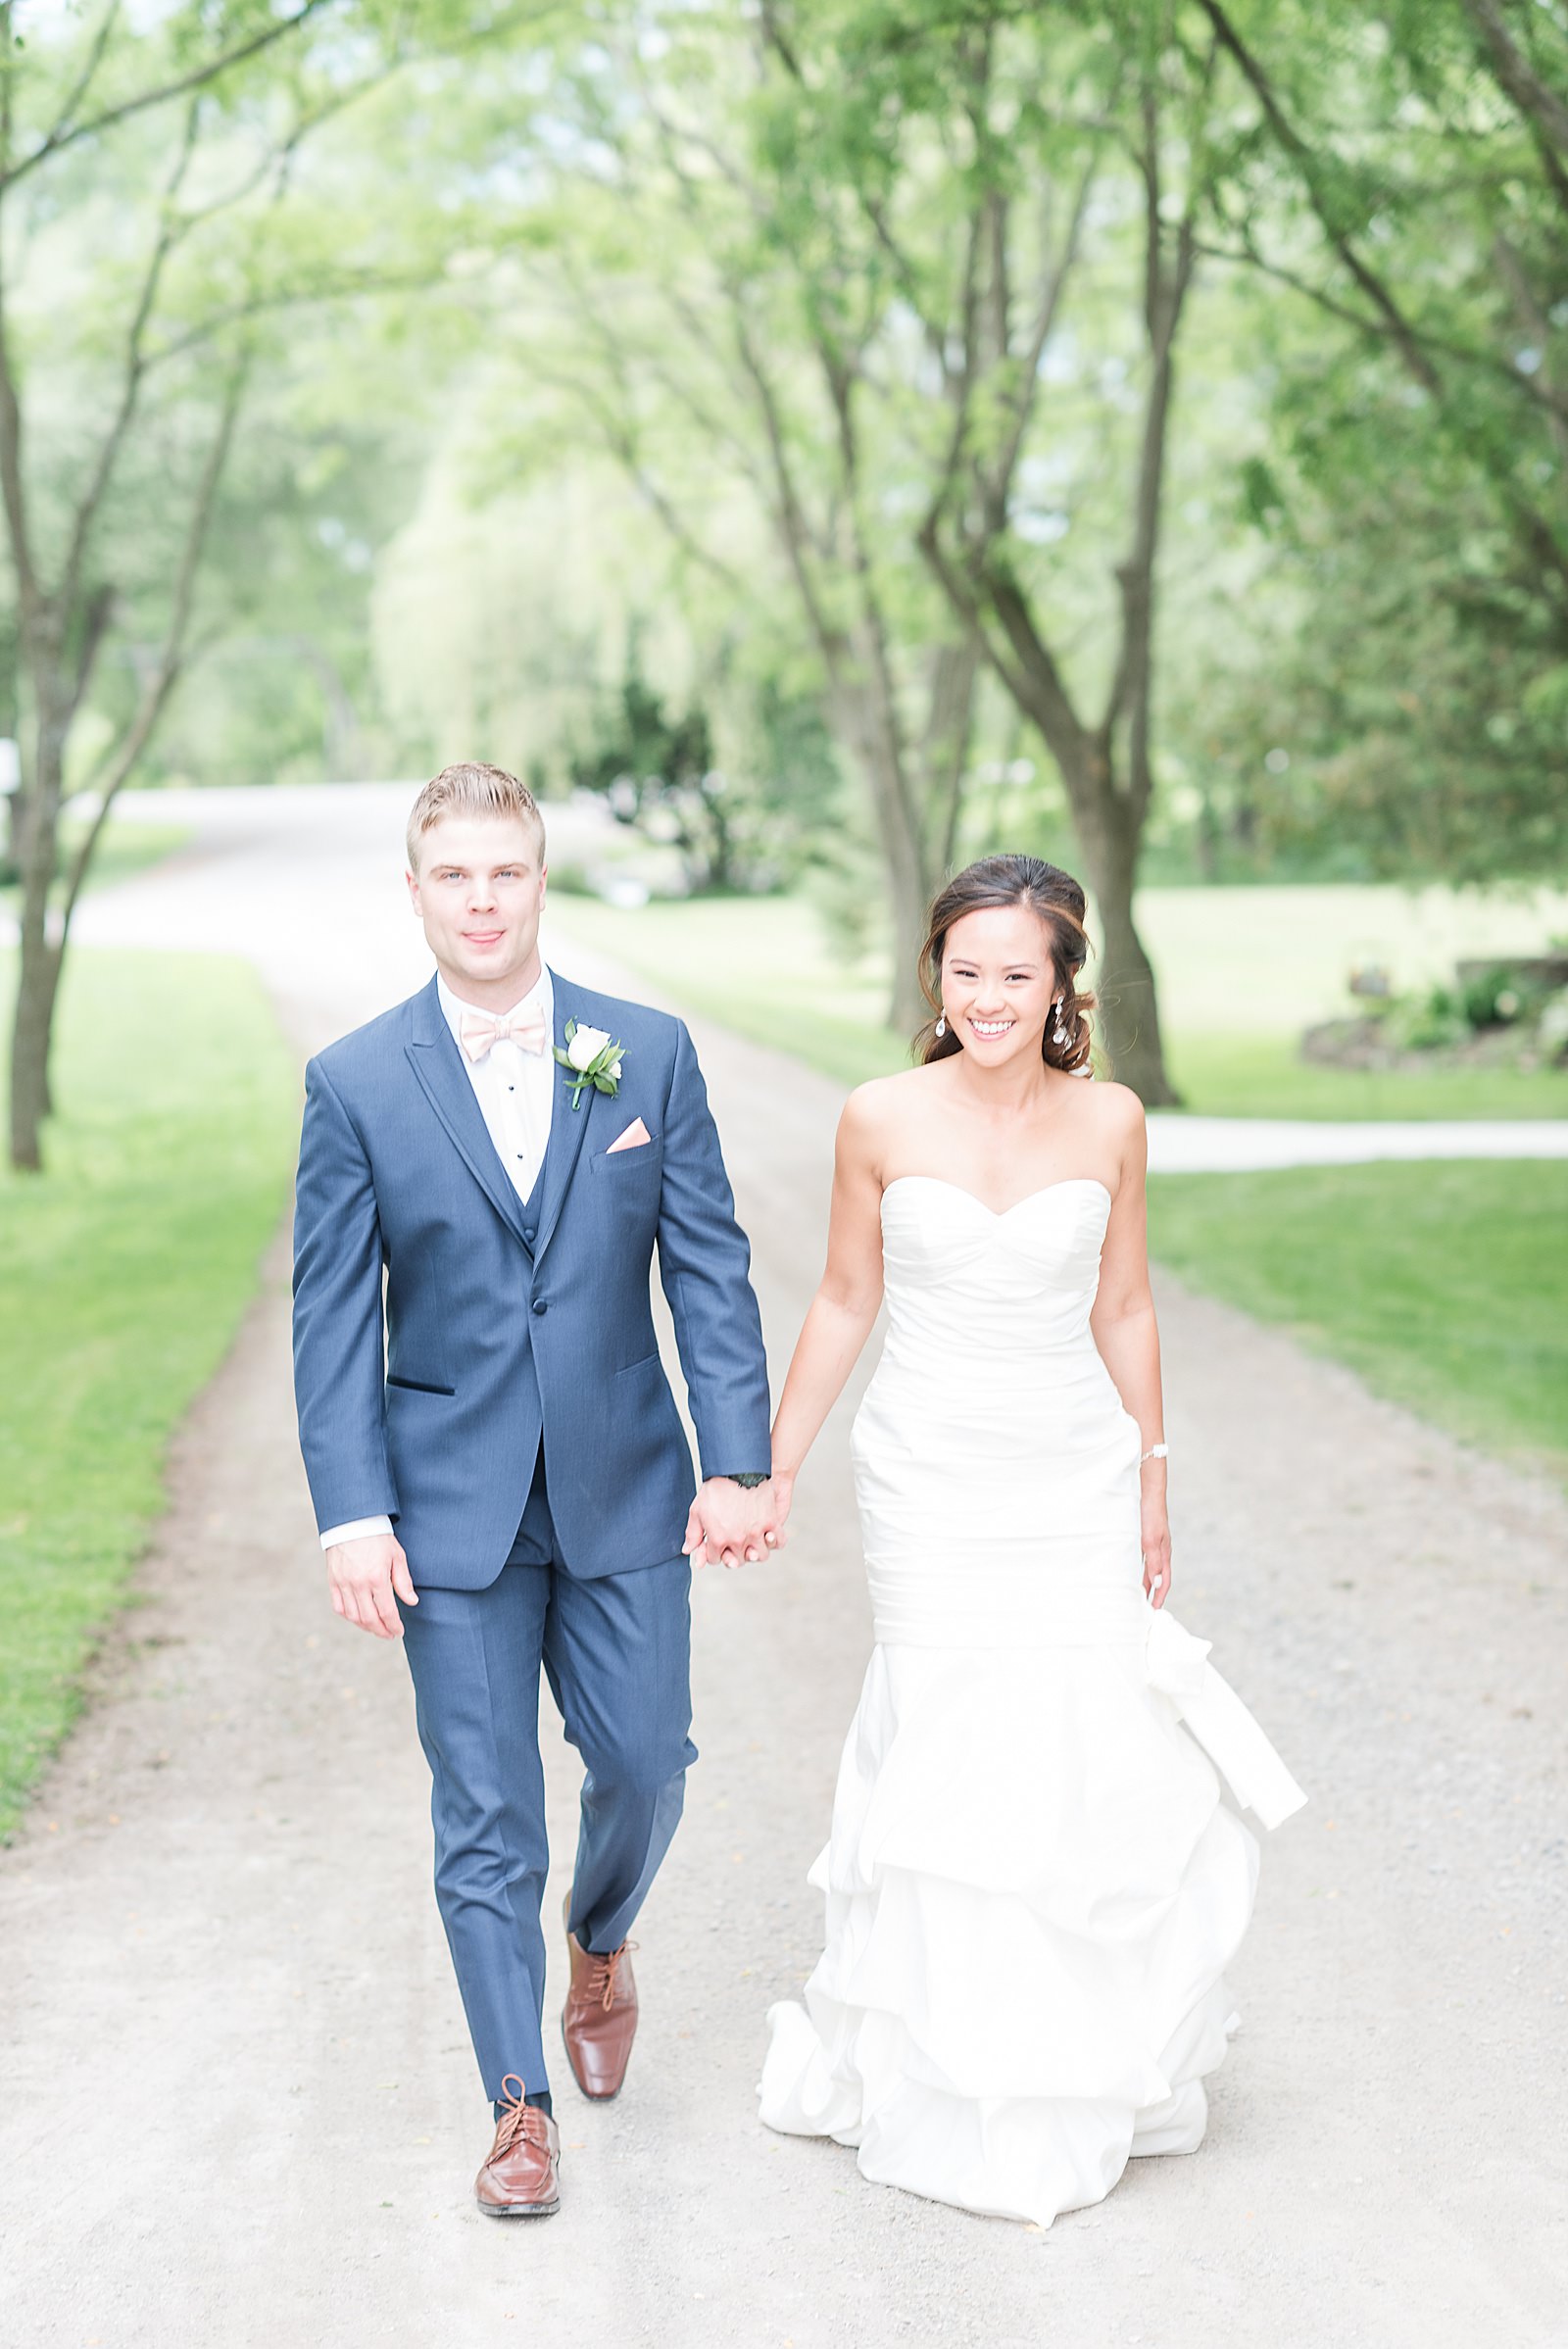 Summer stonefields estate wedding | ottawa wedding | wedding photos at the barn loft at stonefields estate in beckwith get more inspiration from this fun summertime wedding. #ottawawedding #weddingphotography #ottawaweddings